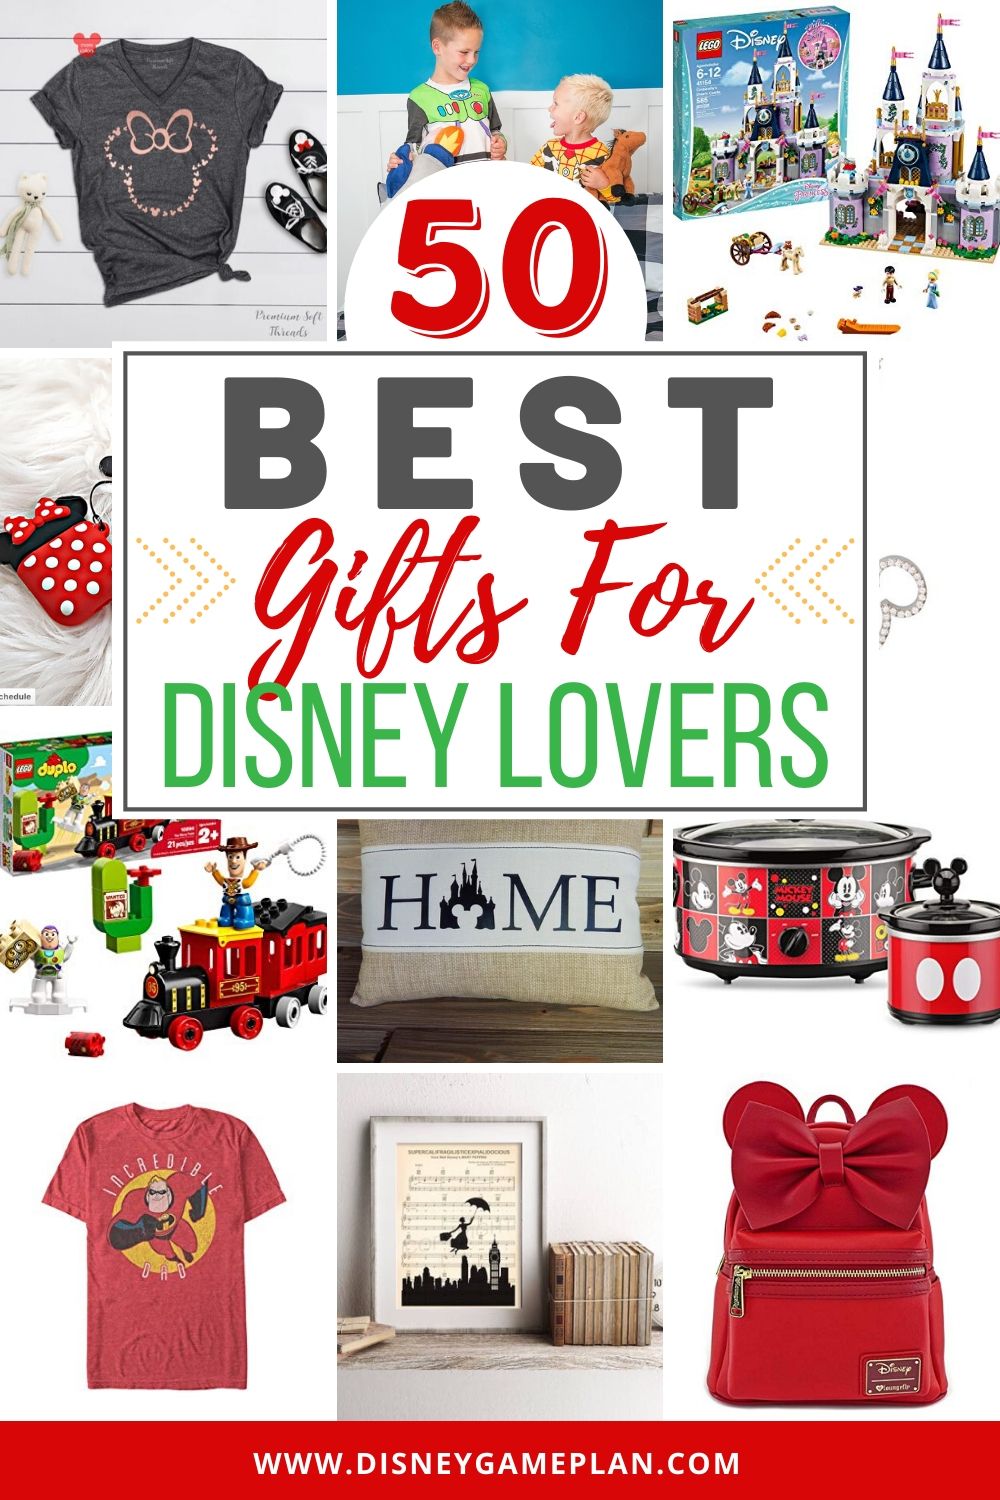 Have a Disney fan in your life? This list of 50 Gifts For Disney Lovers has gift ideas for young and old. Treat the Disney lover in your life to one of these fun Disney gift ideas. #disneygiftidea #disneytips #christmasideas